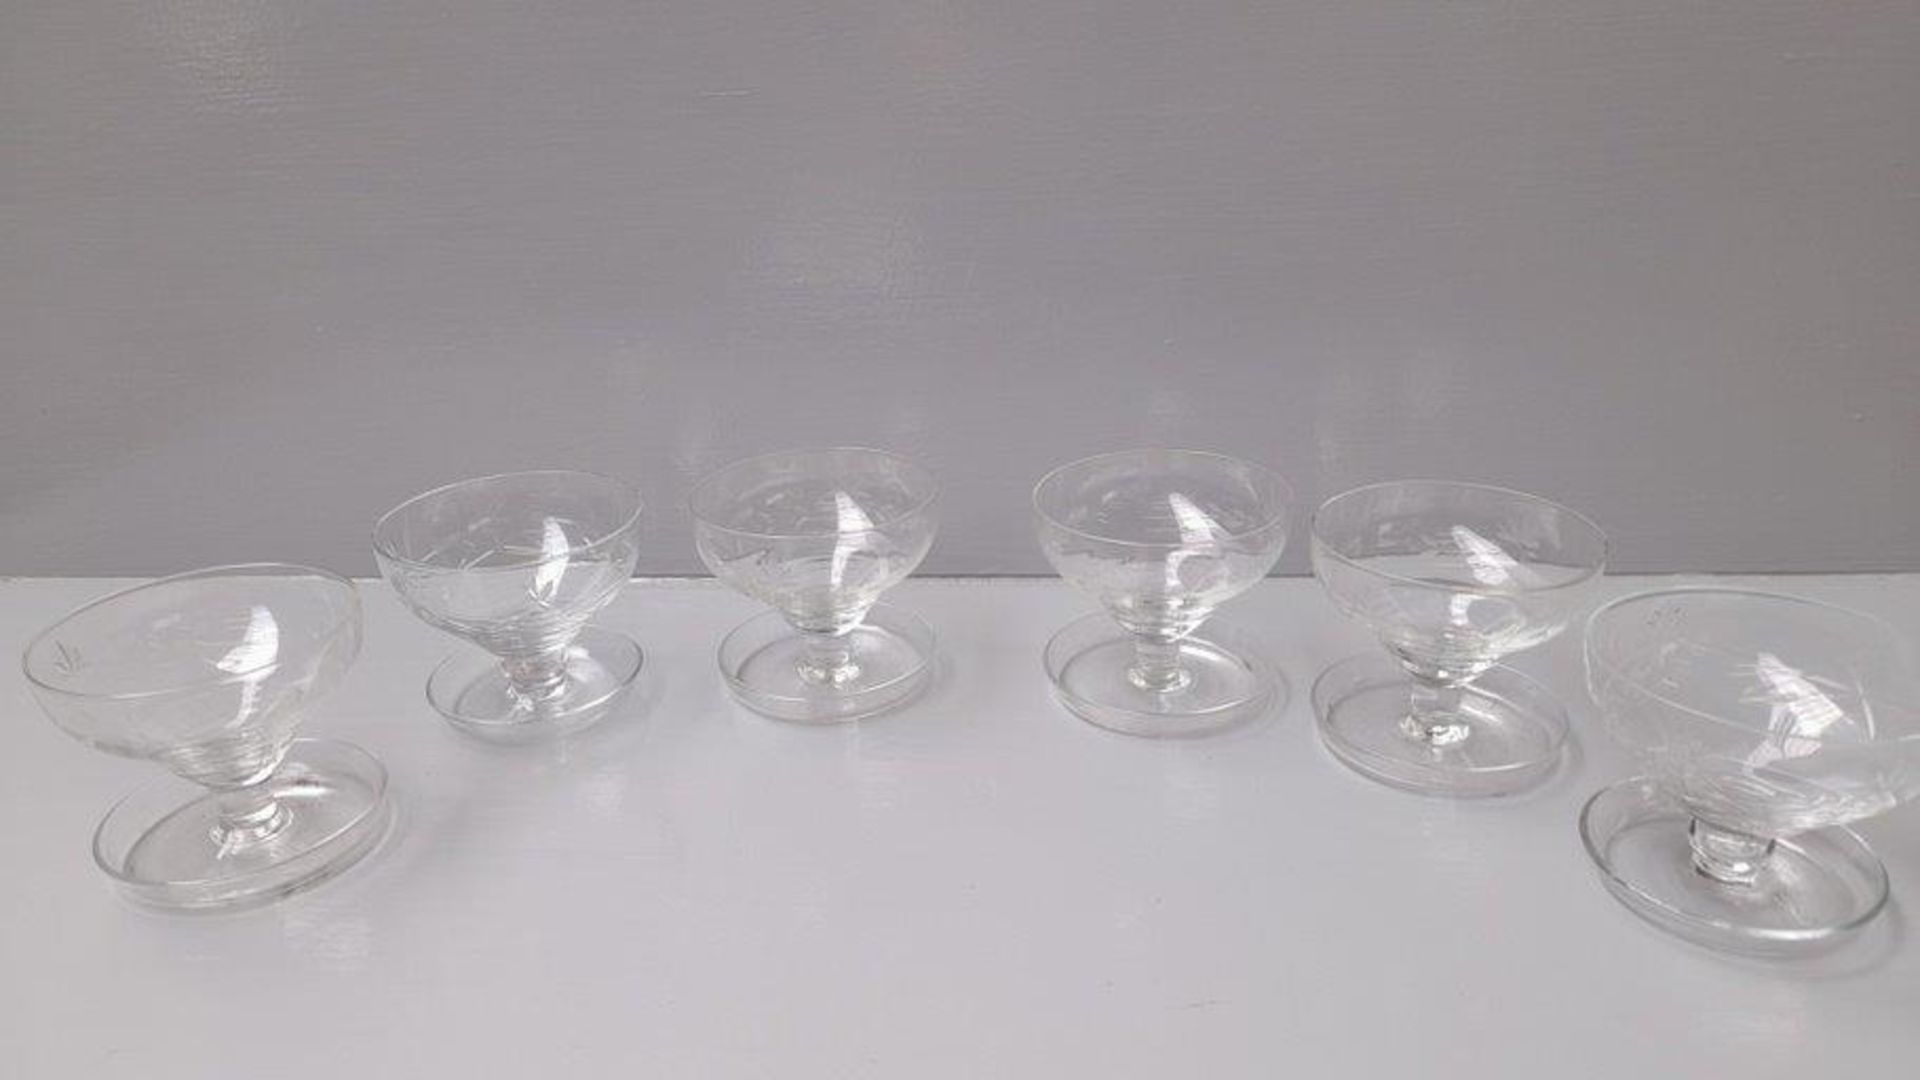 2 Sets Of 6 Cut Glass Dessert Dishes - Image 2 of 2